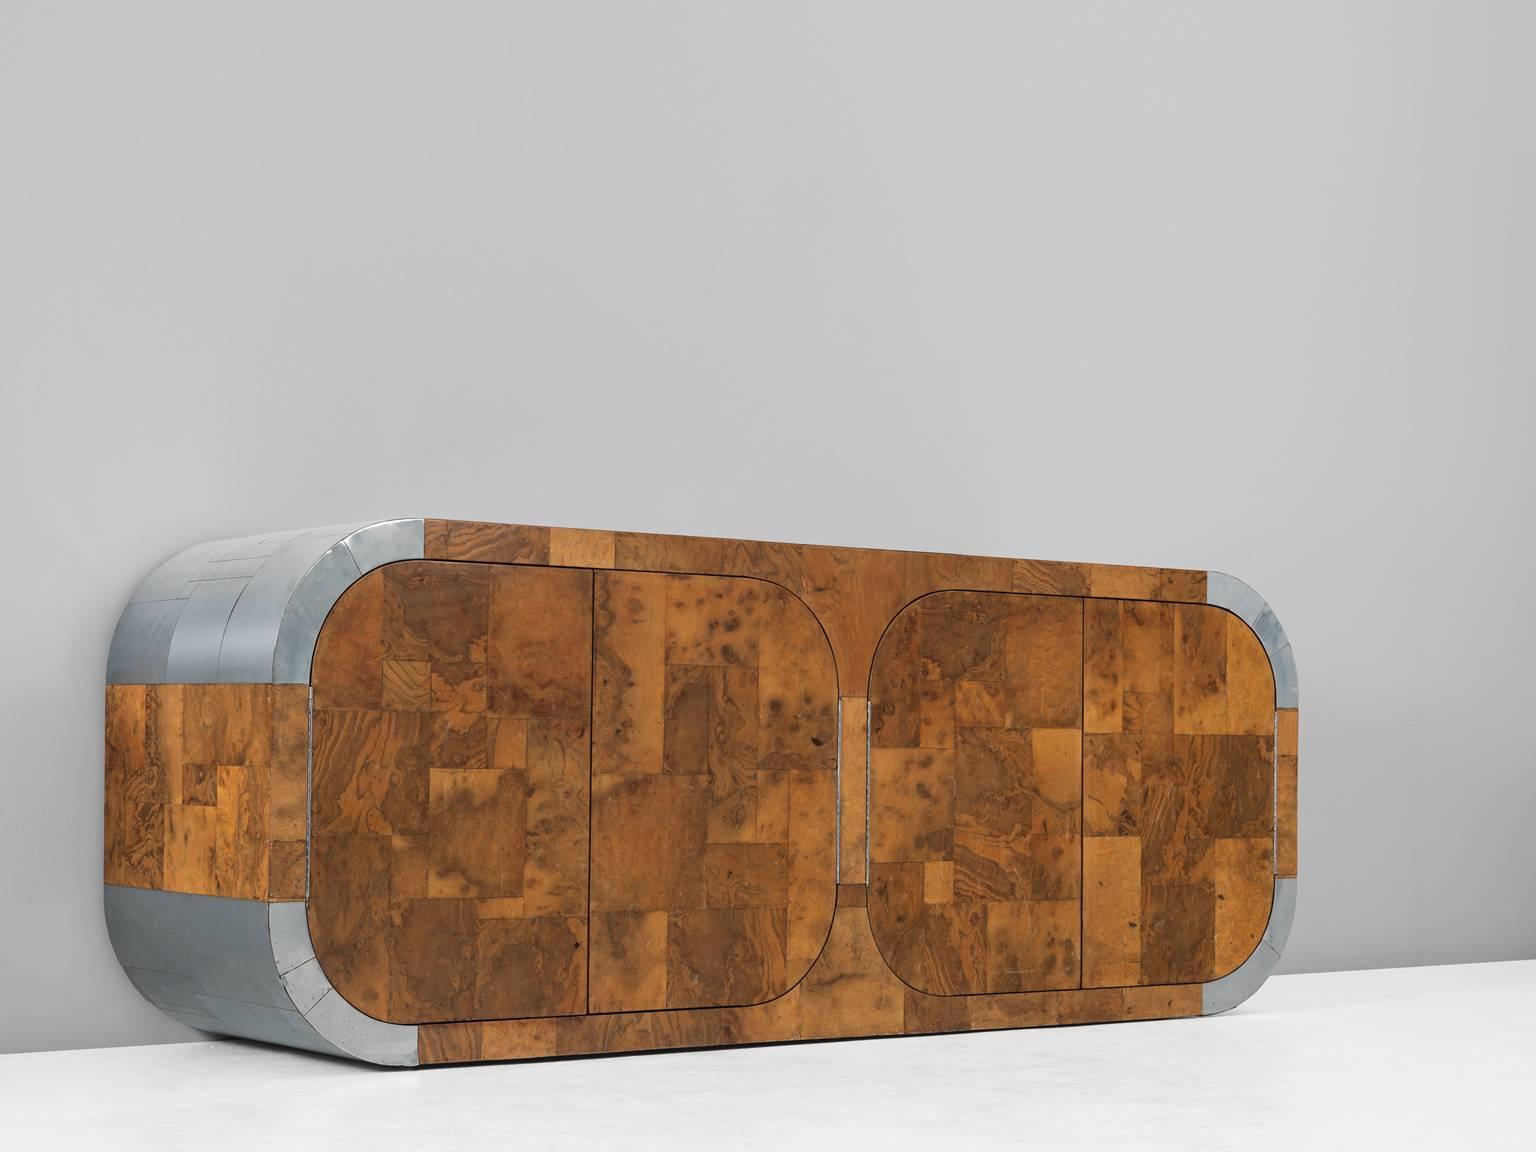 Sideboard from the 500 series, in burl wood and metal, by Paul Evans, United States 1970-1975. 

Magnificent curved sideboard by American designer Paul Evans. This cabinet shows a patchwork motive of burl wood and metal. Evans is known for his use